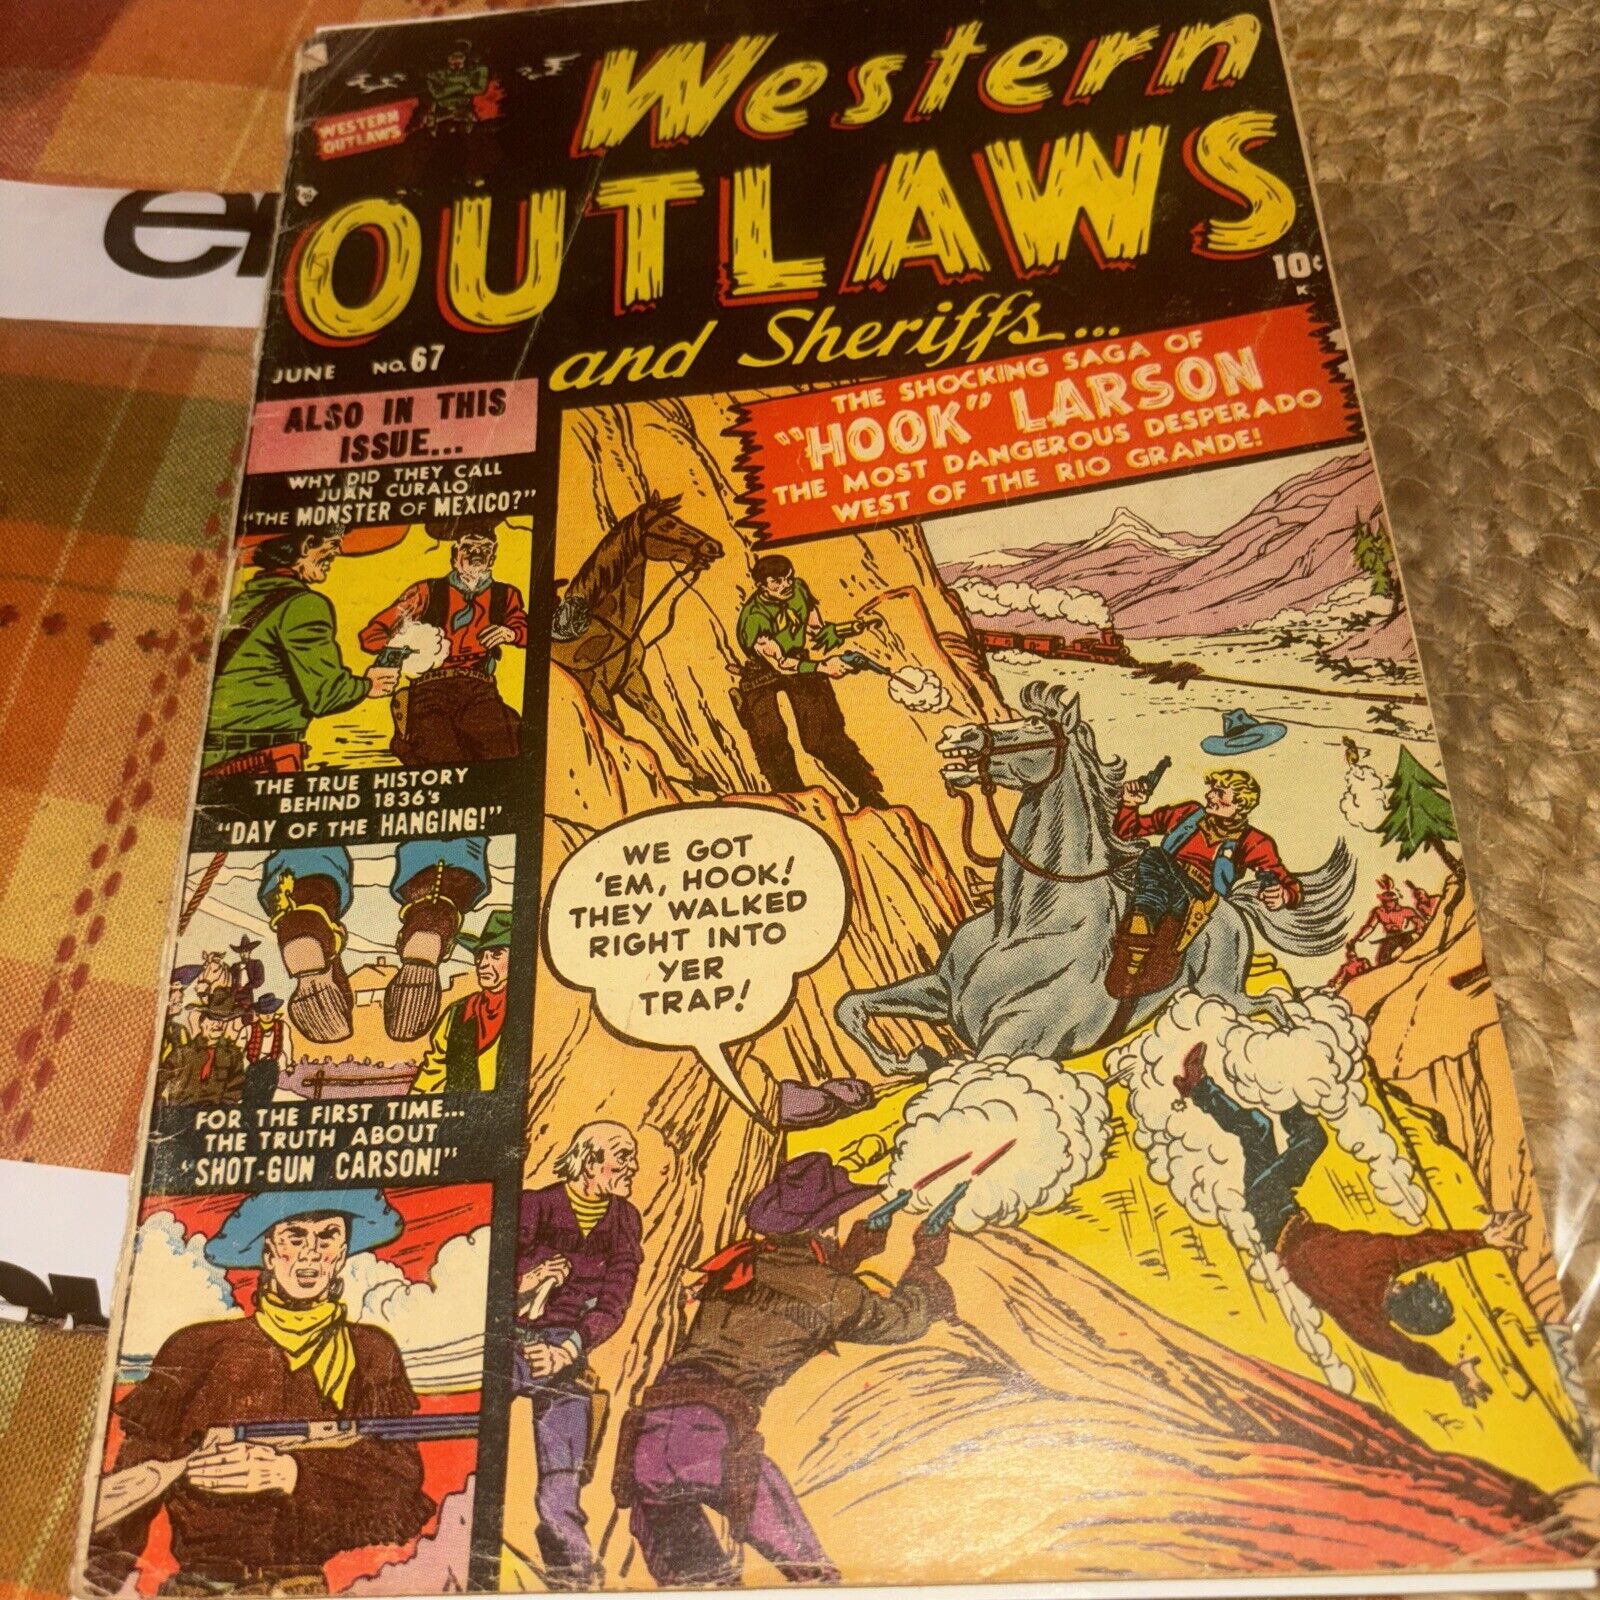 WESTERN OUTLAWS AND SHERIFFS #67, 1950 . Hanging Panels And Cannibal Story